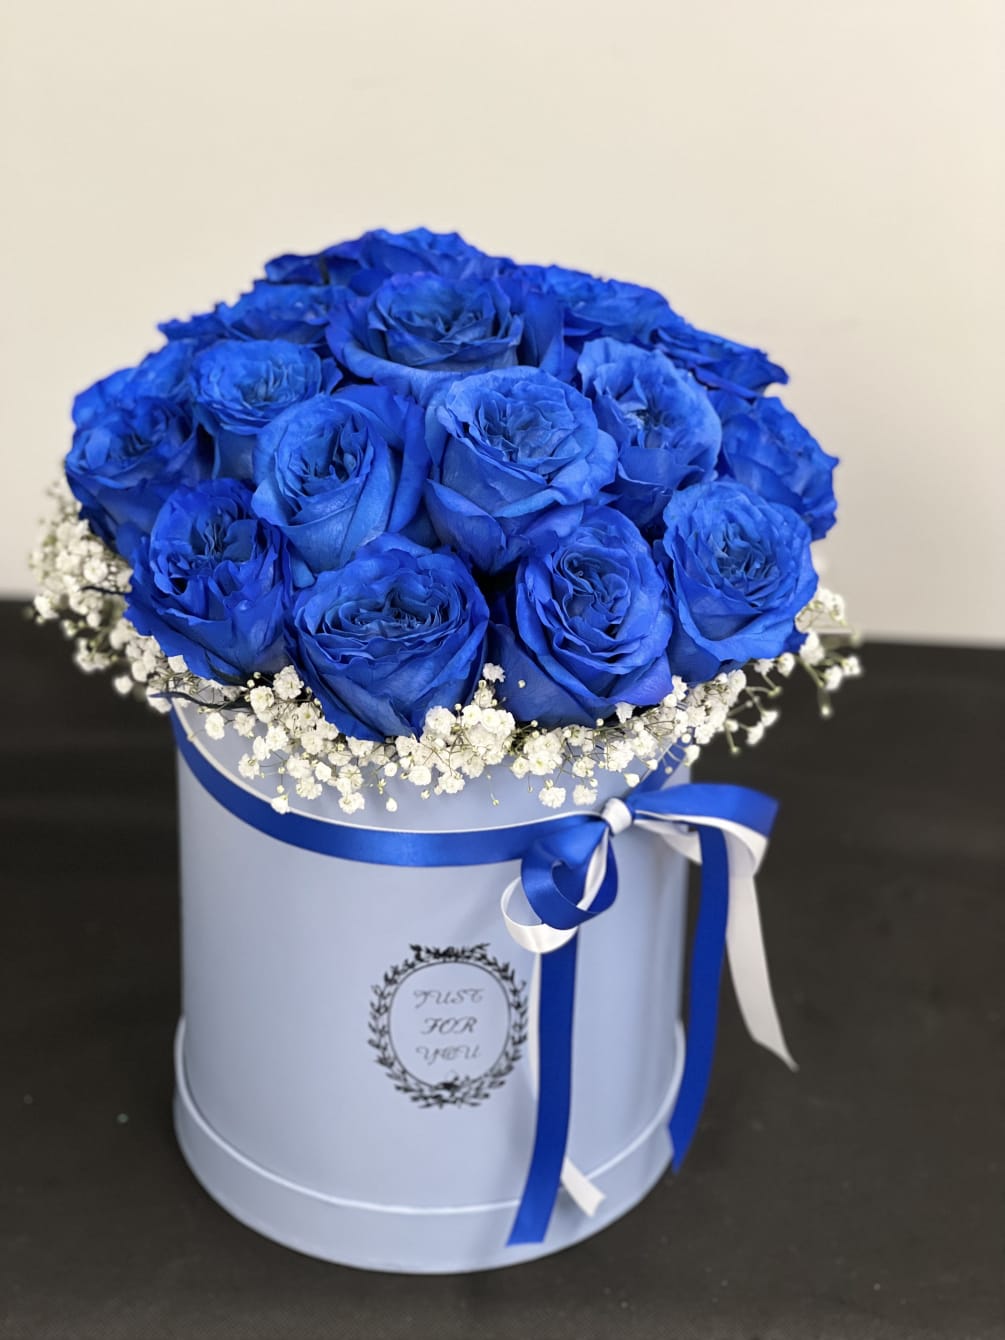 A box of 25 blue roses